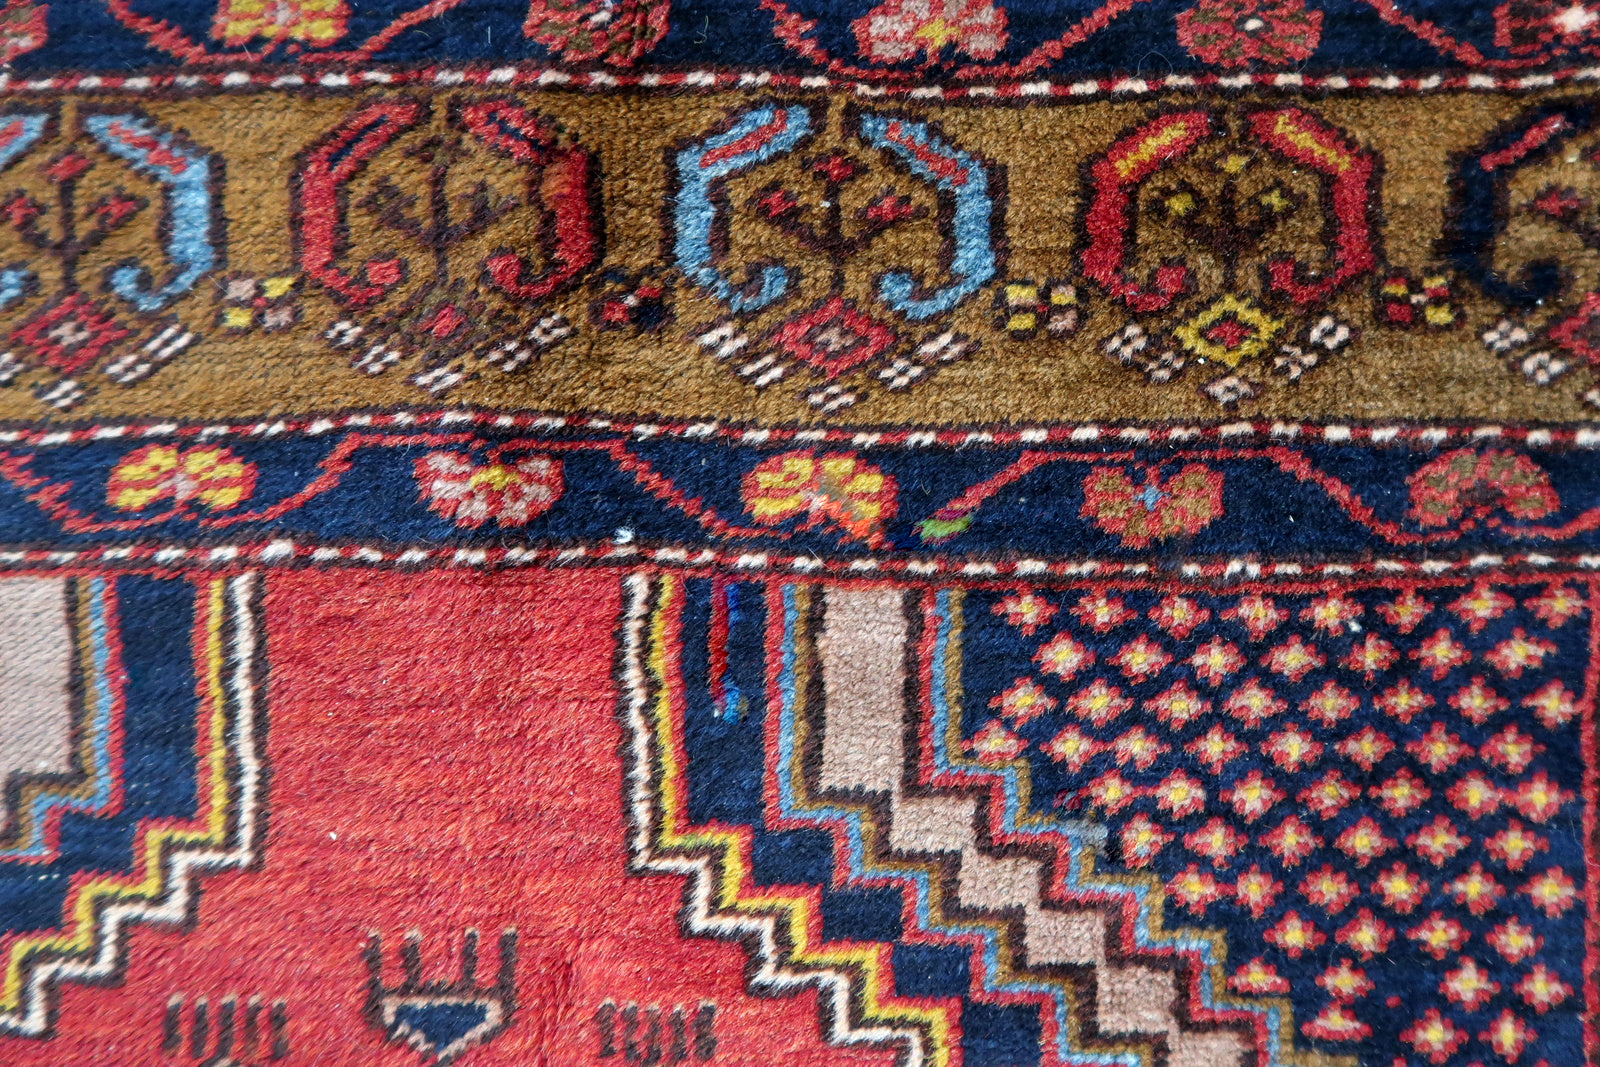 Side angle view of the rug, highlighting its thickness and plush texture